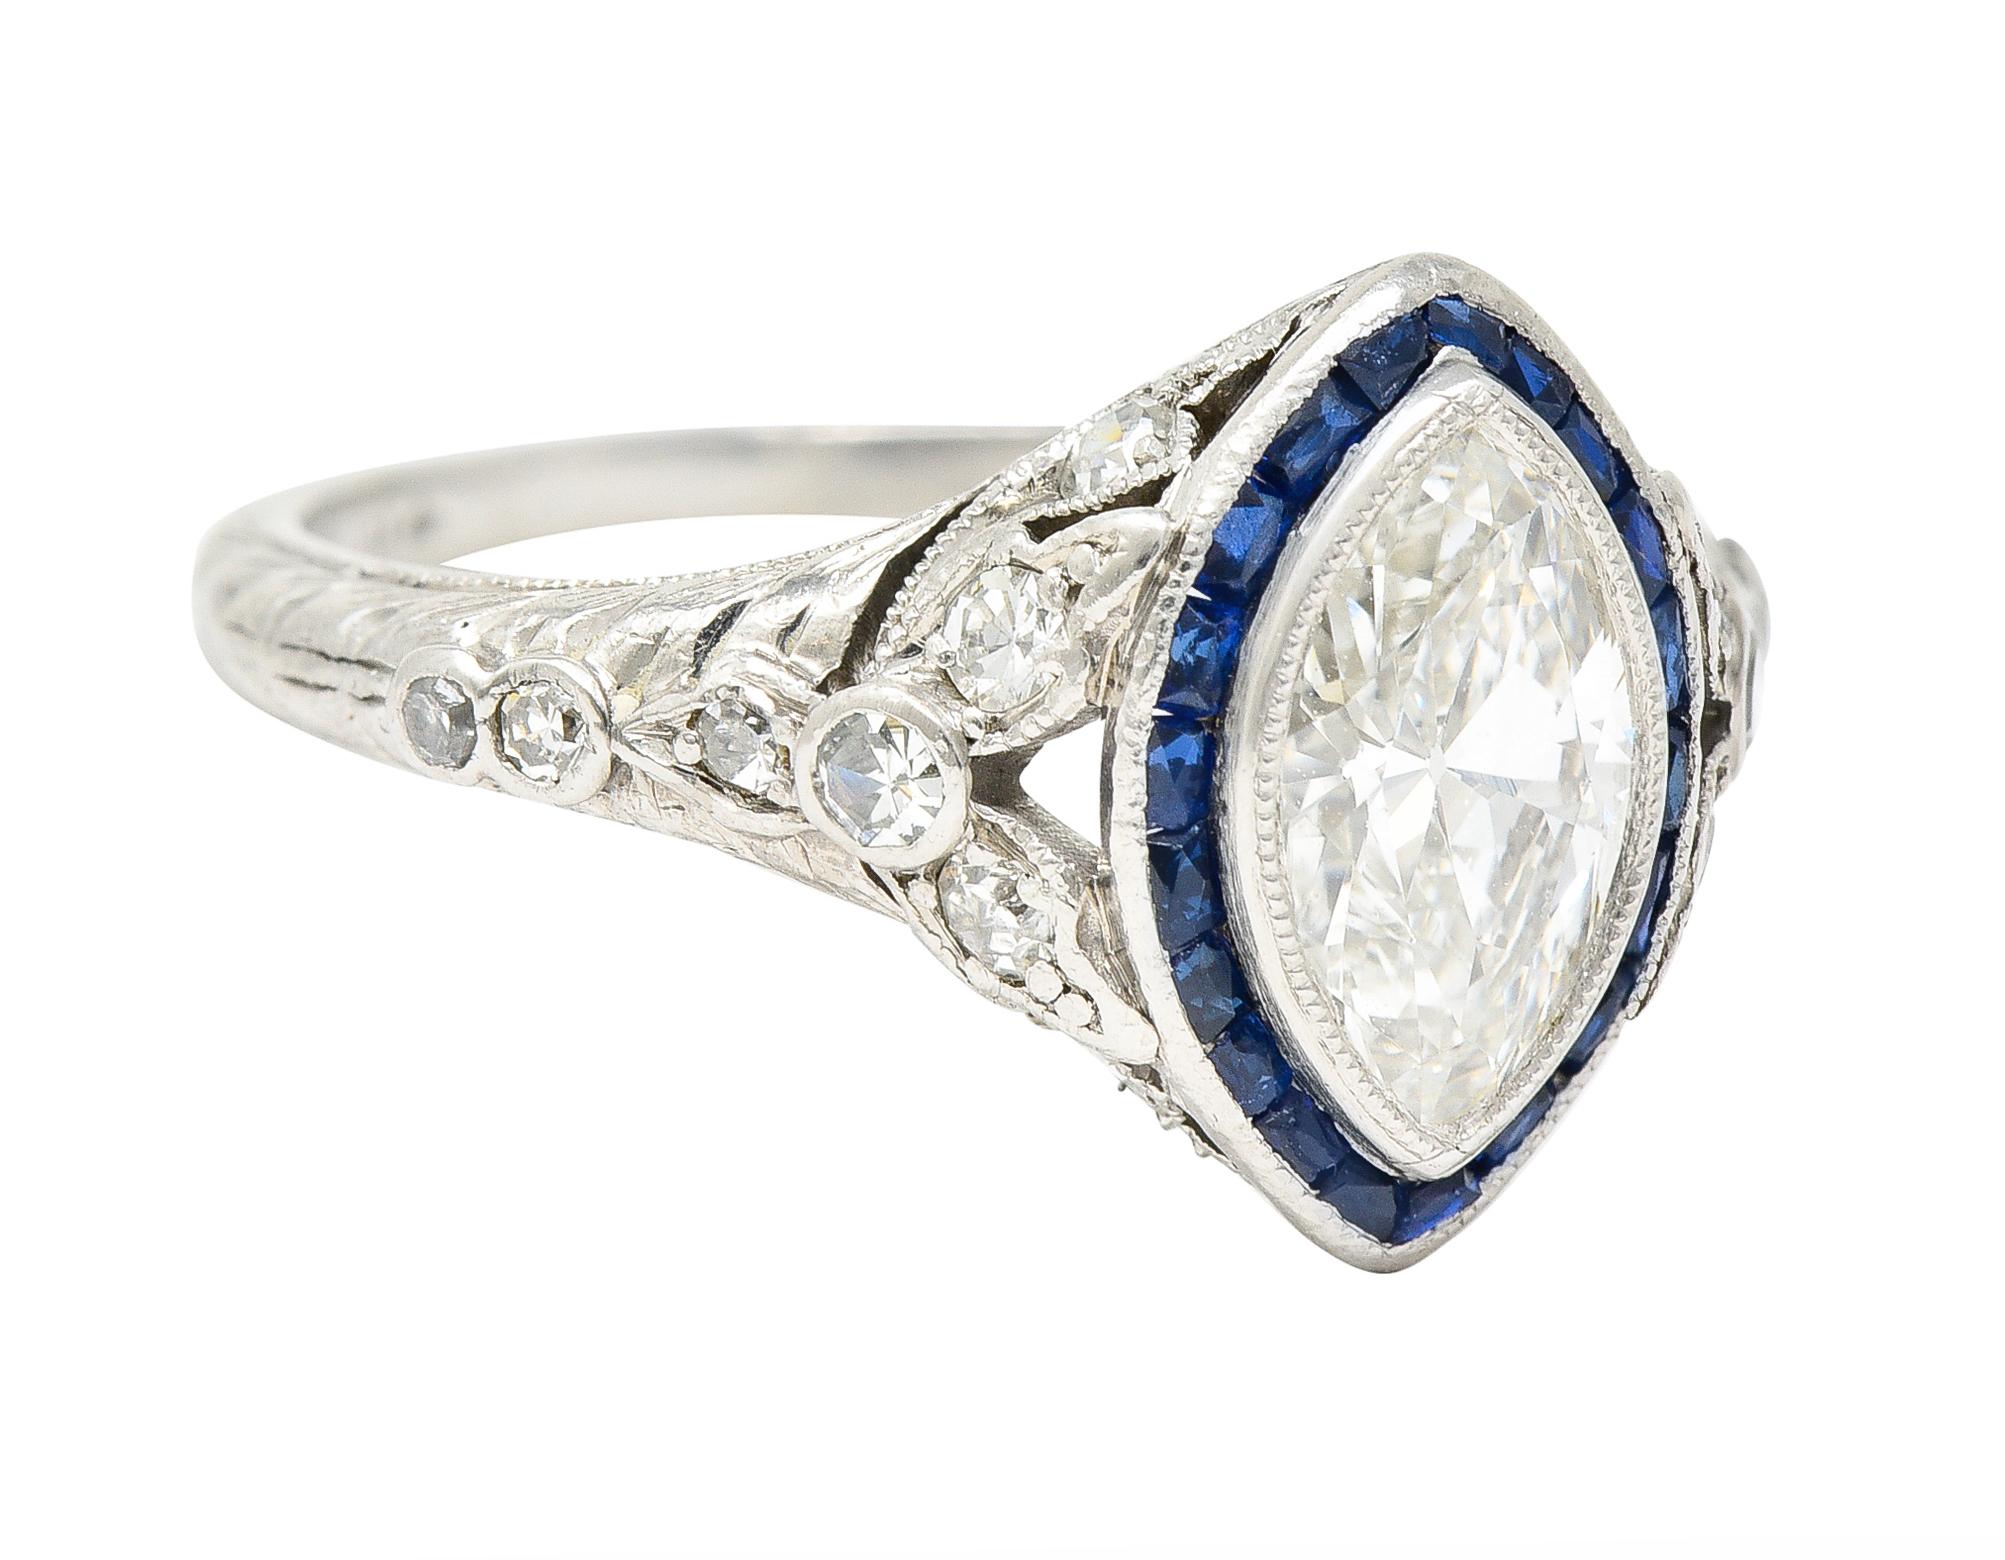 Centering a marquise cut diamond weighing approximately 0.90 carat total - I color with VS1 clarity. Bezel set with a halo surround of French cut sapphires weighing approximately 0.60 carat total. Transparent medium-dark blue in color - channel set